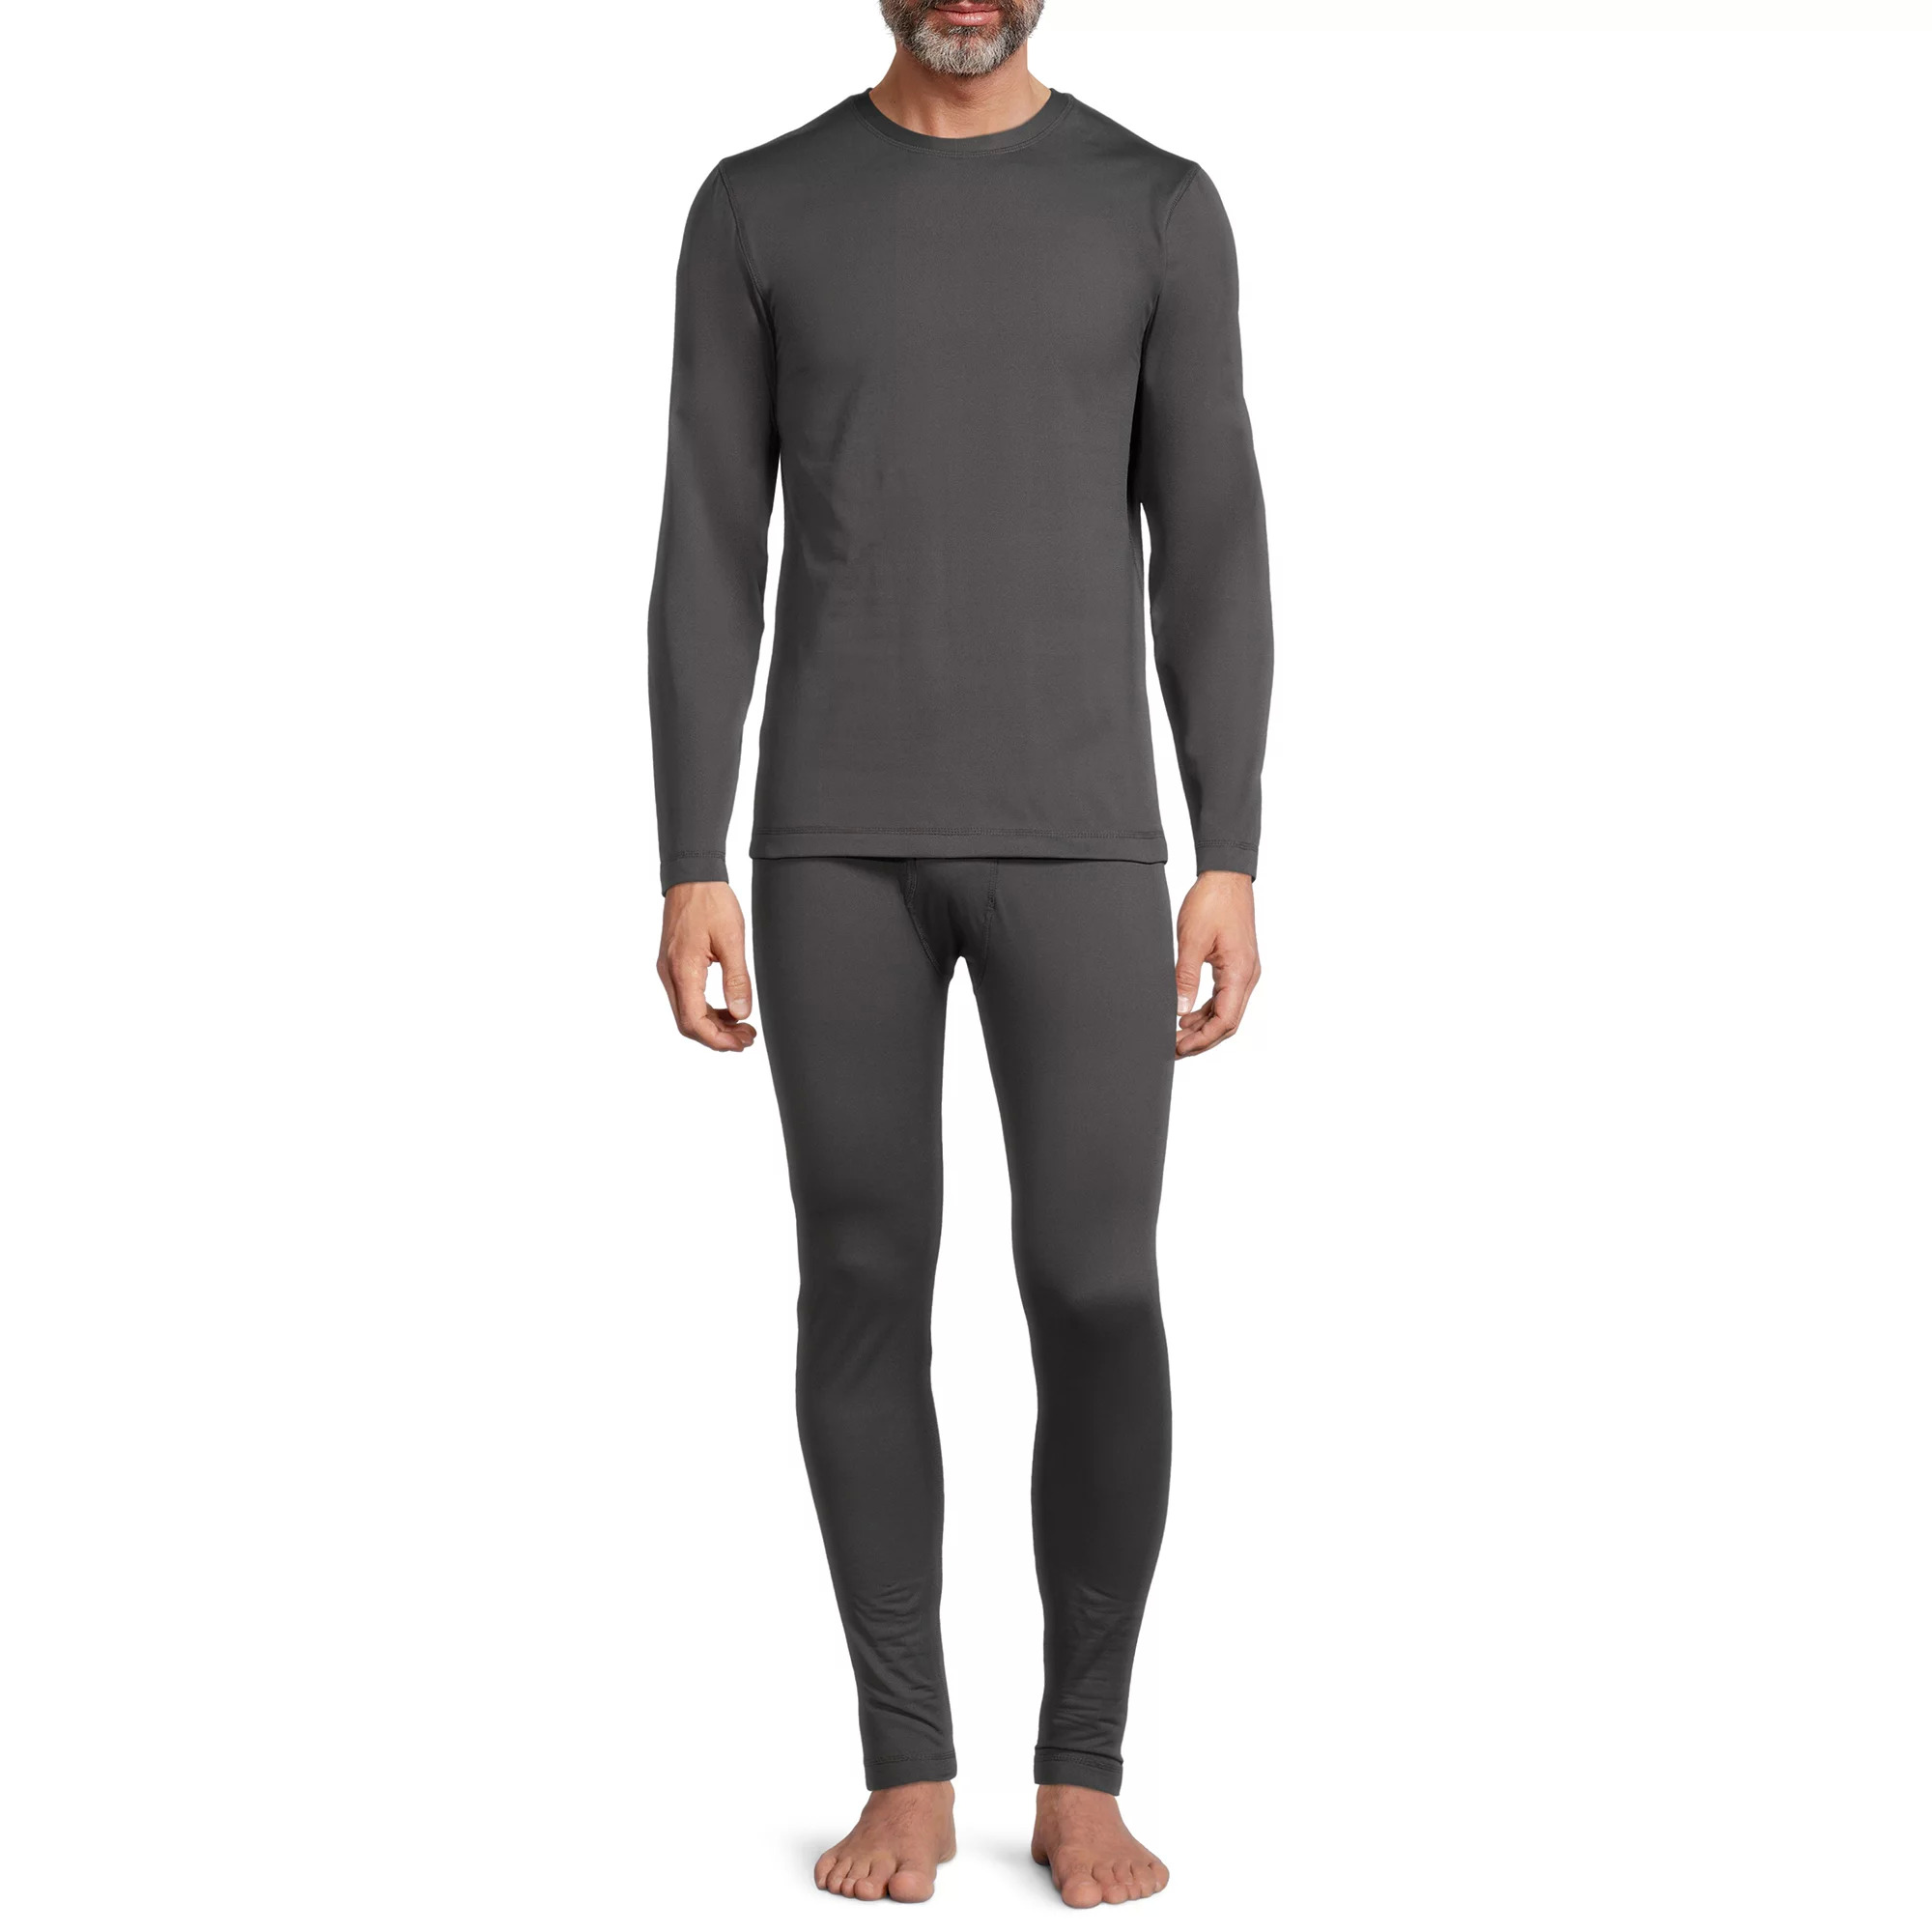 2-Piece Isotoner Men's Brushed Top and Pants Base Layer Set (2 Colors) $5.82 + Free Shipping w/ Walmart+ or $35+